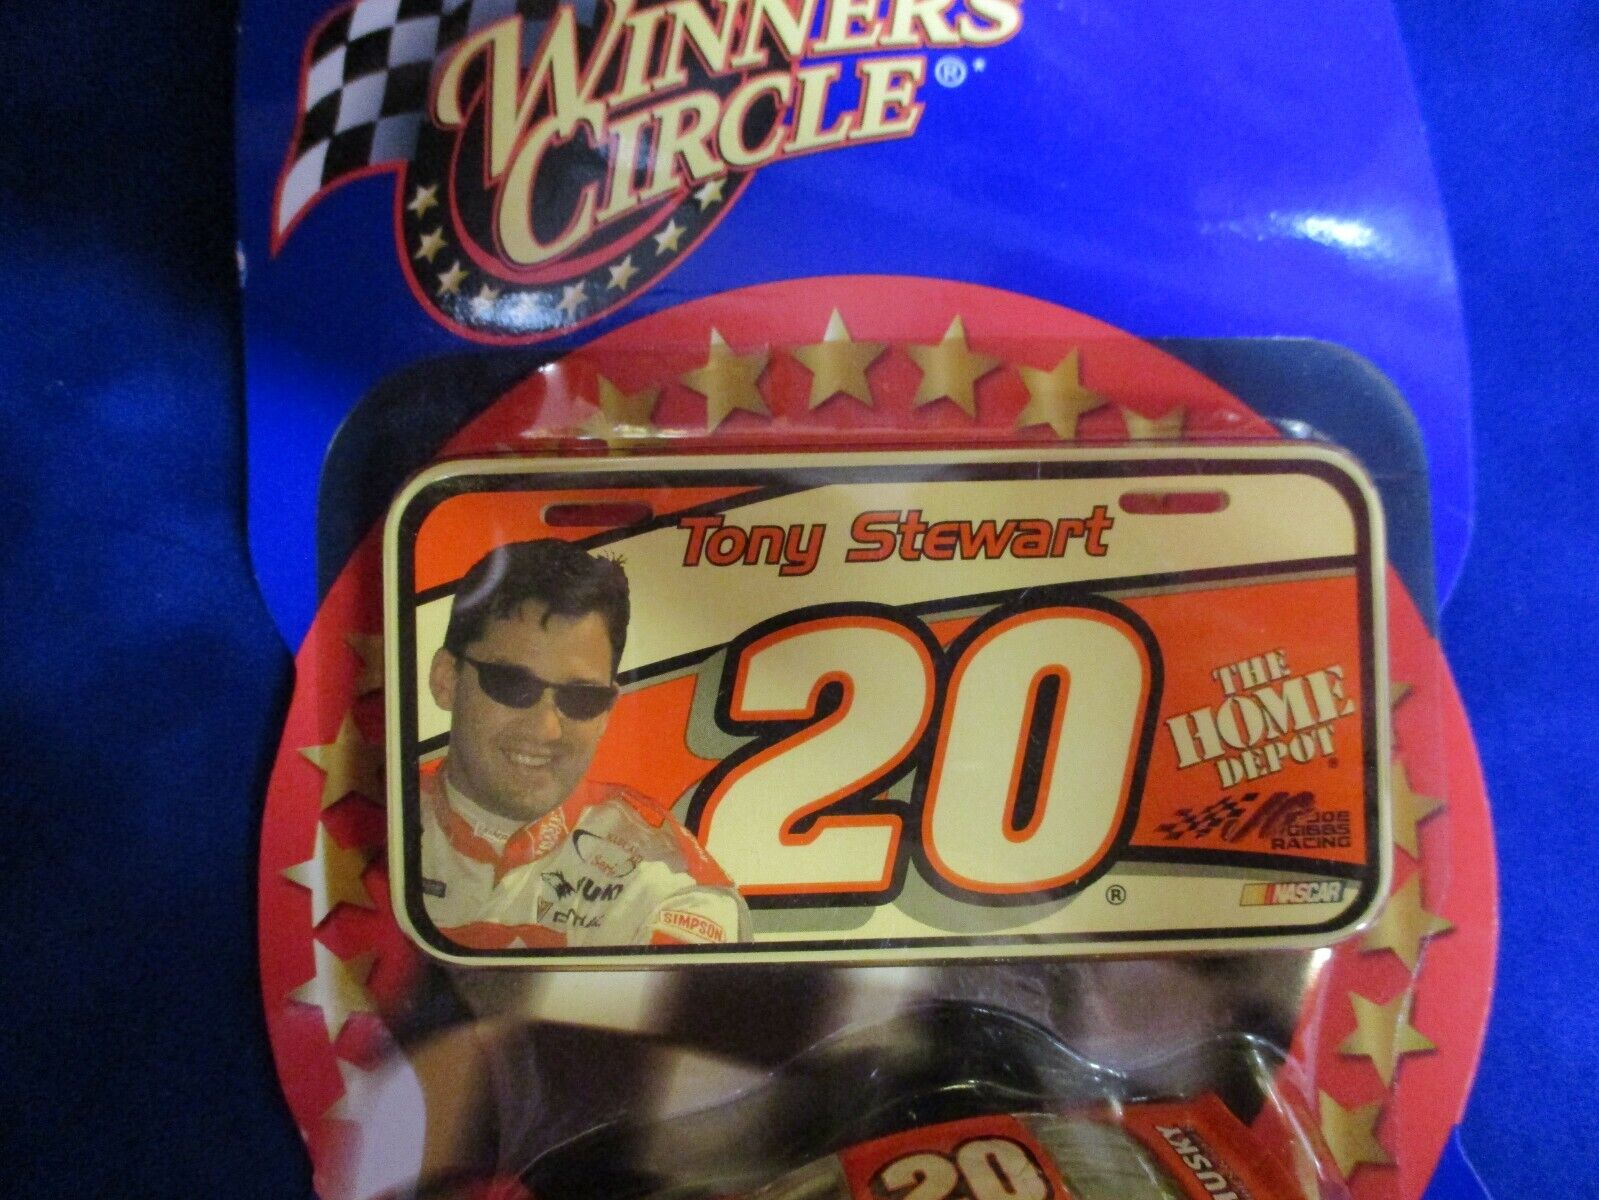 Tony Stewart Winners Circle License Plate Collection The Home Depot 20